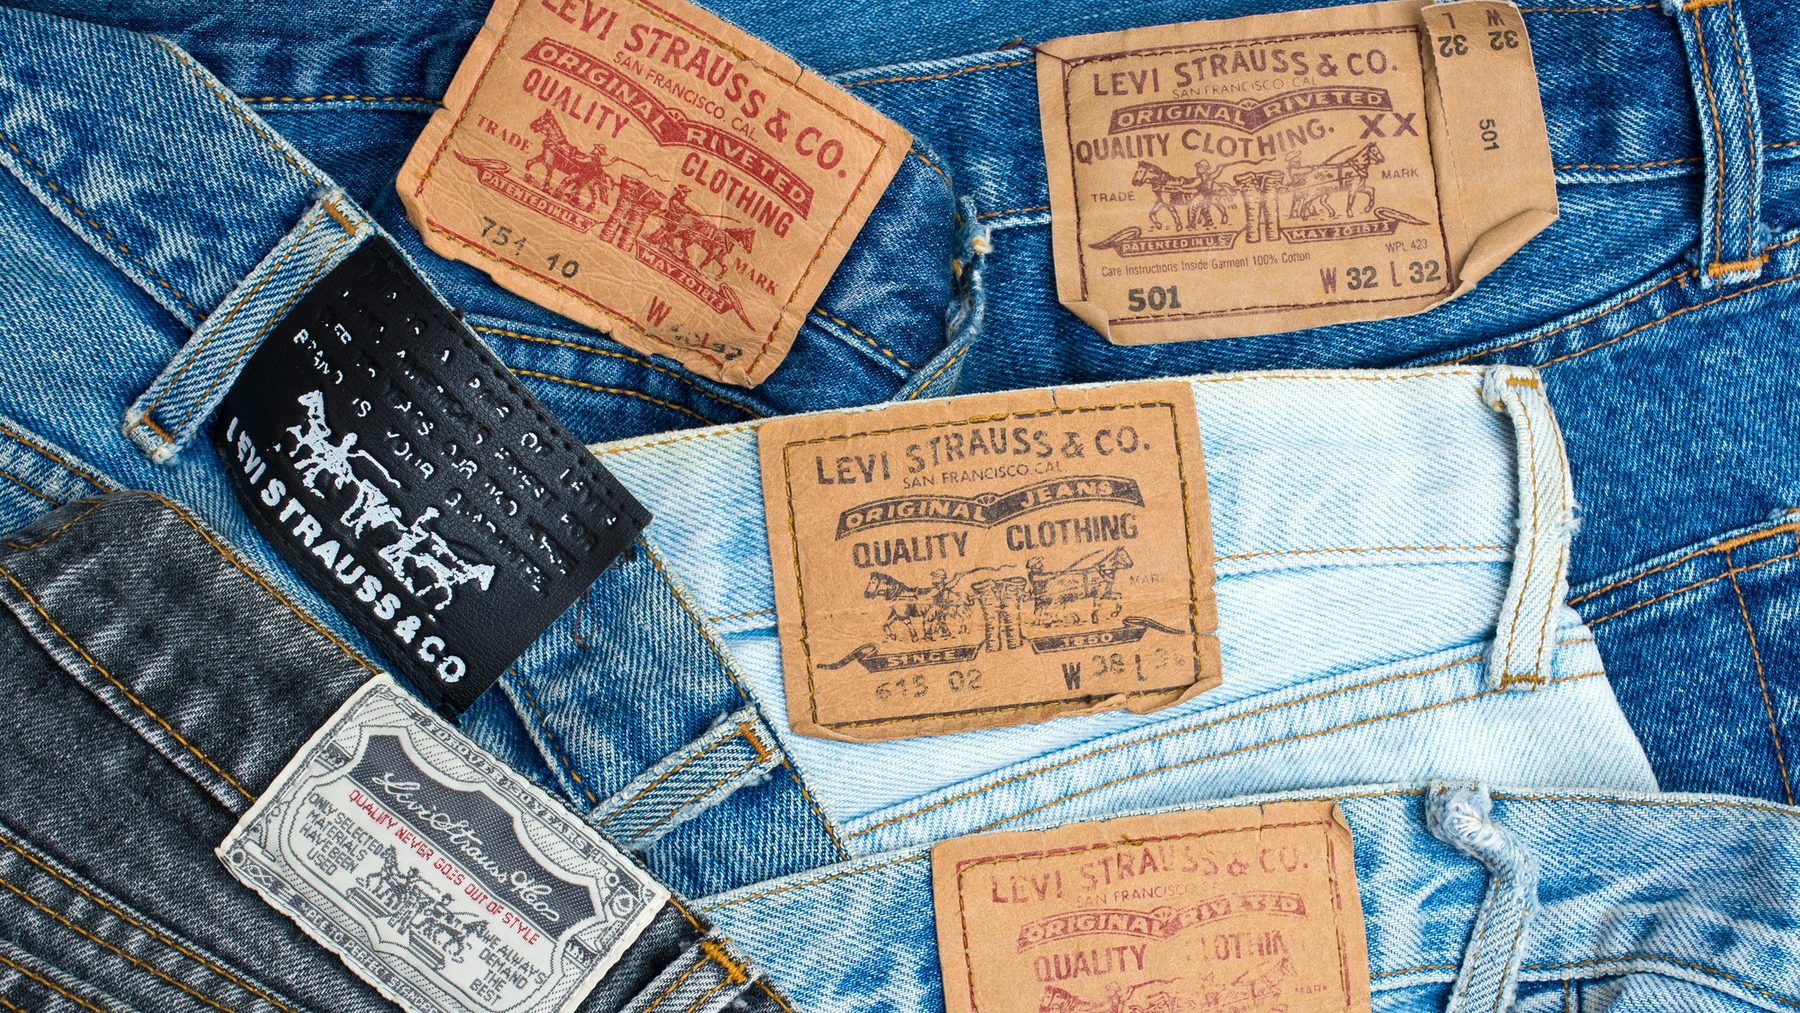 Levis' Social Responsibility, Can 